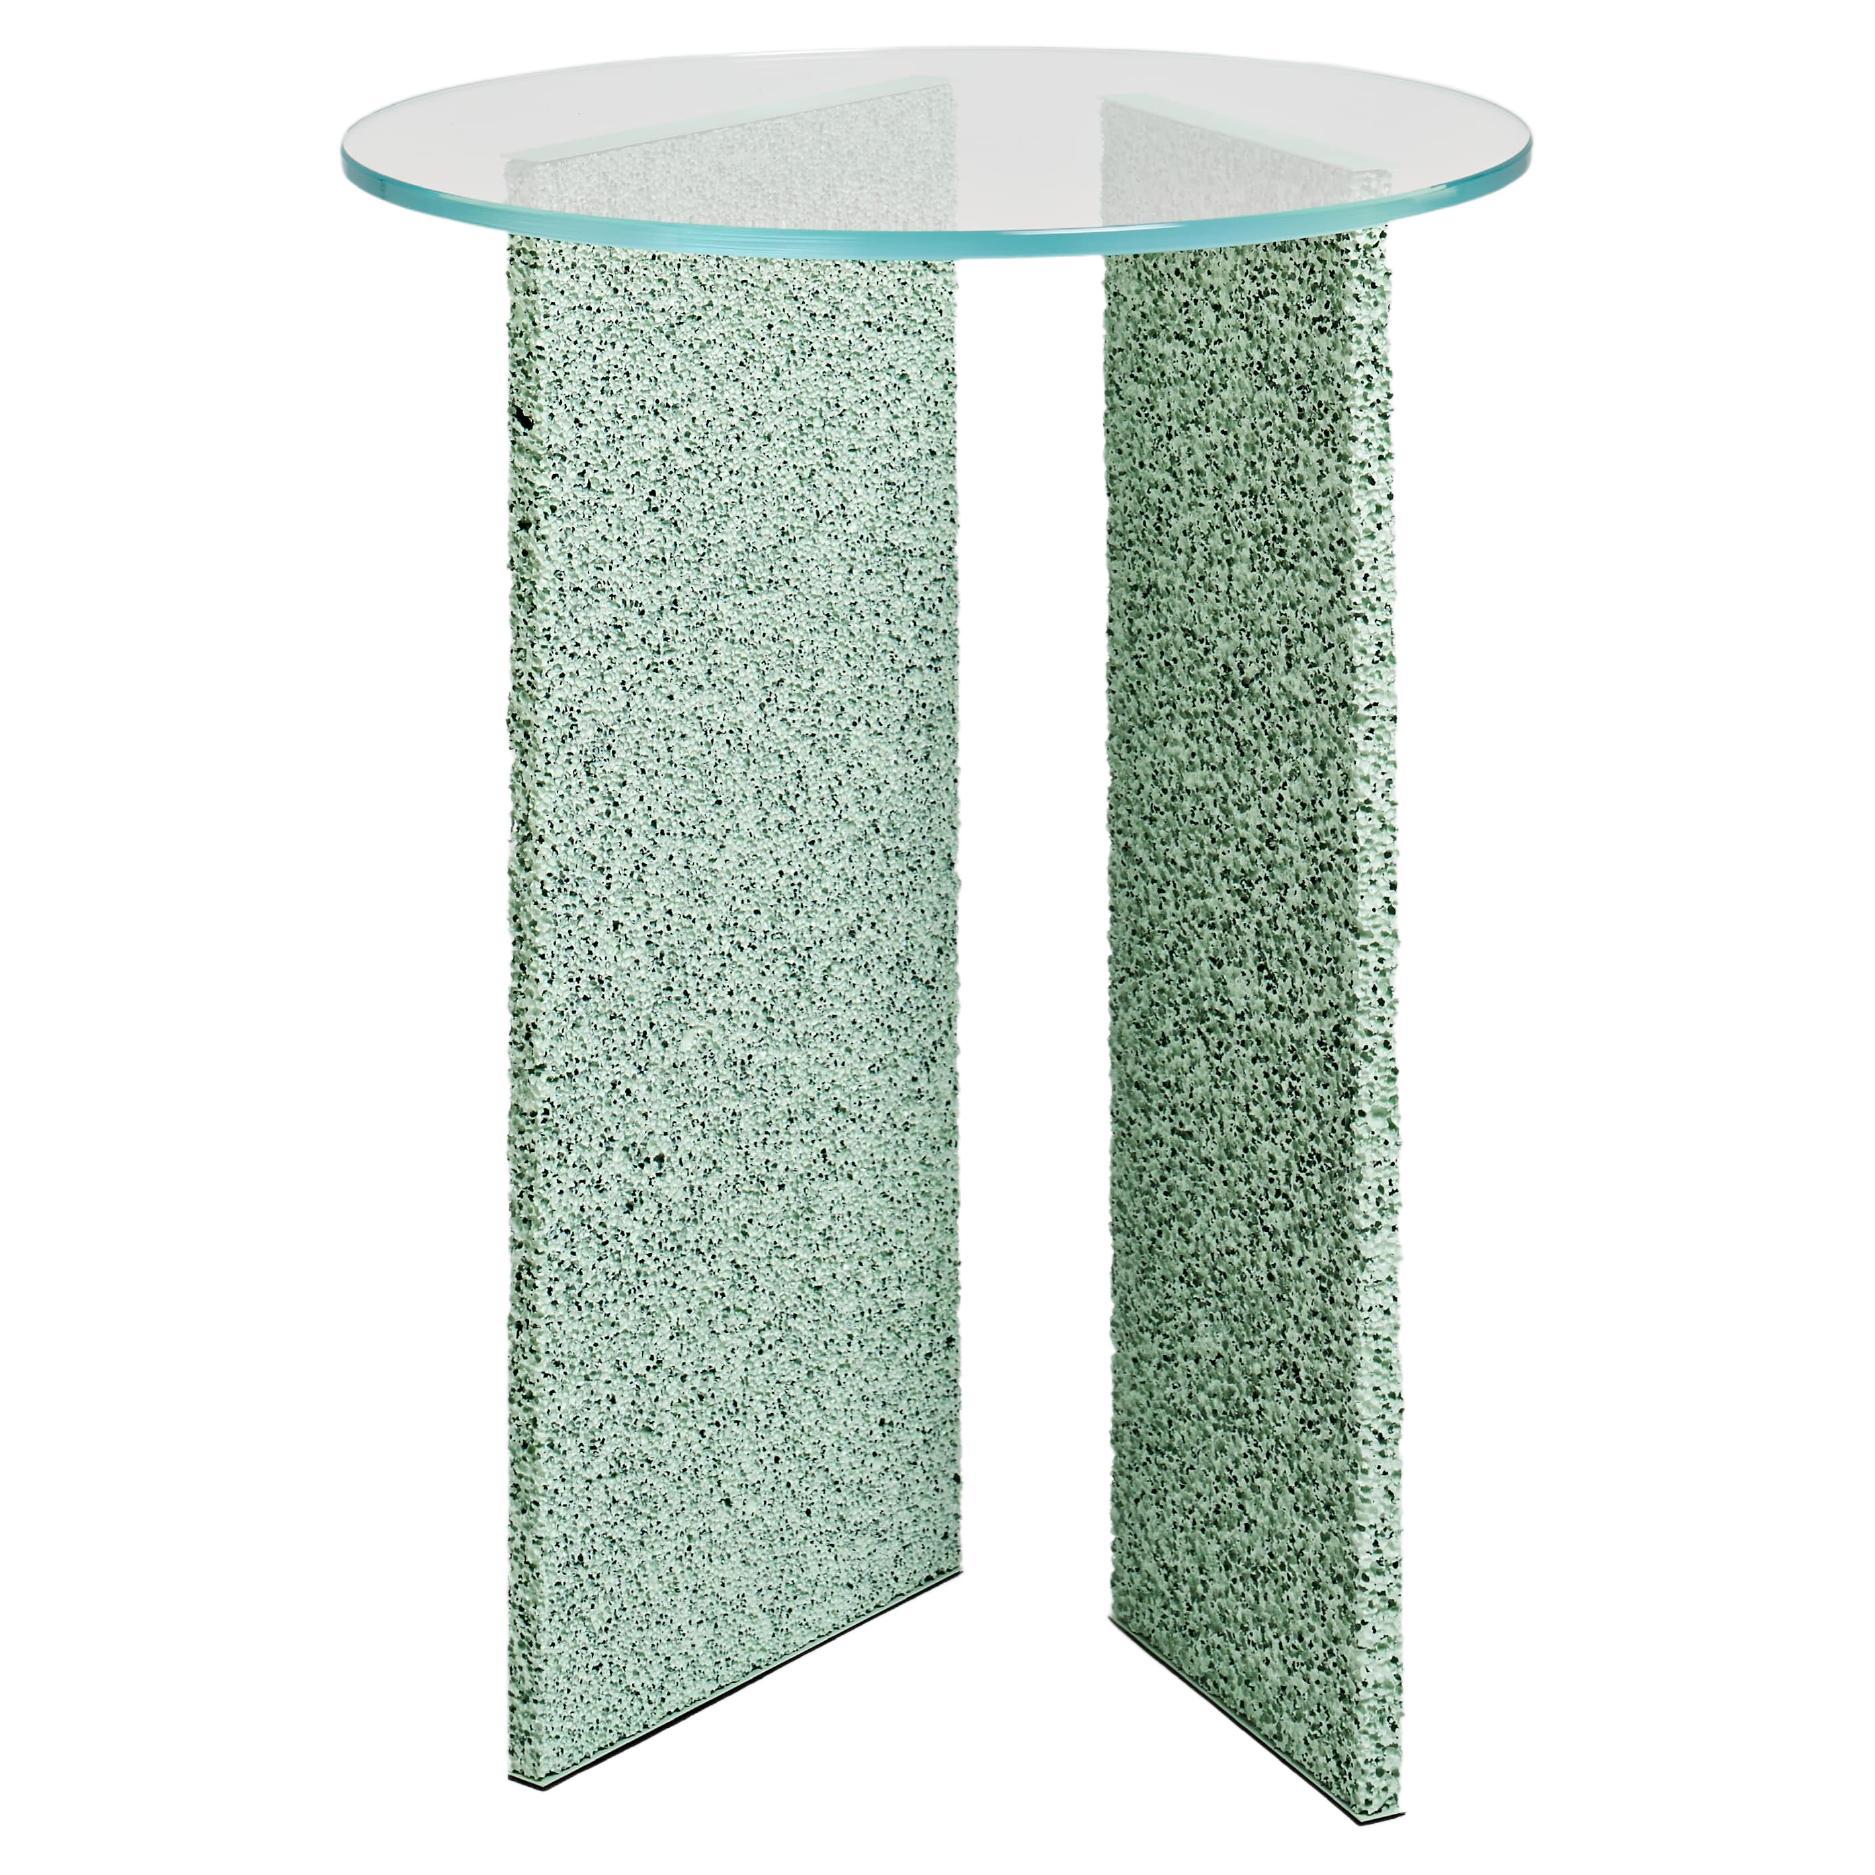 SLAB Light Green Textured Side Table With Glass Top